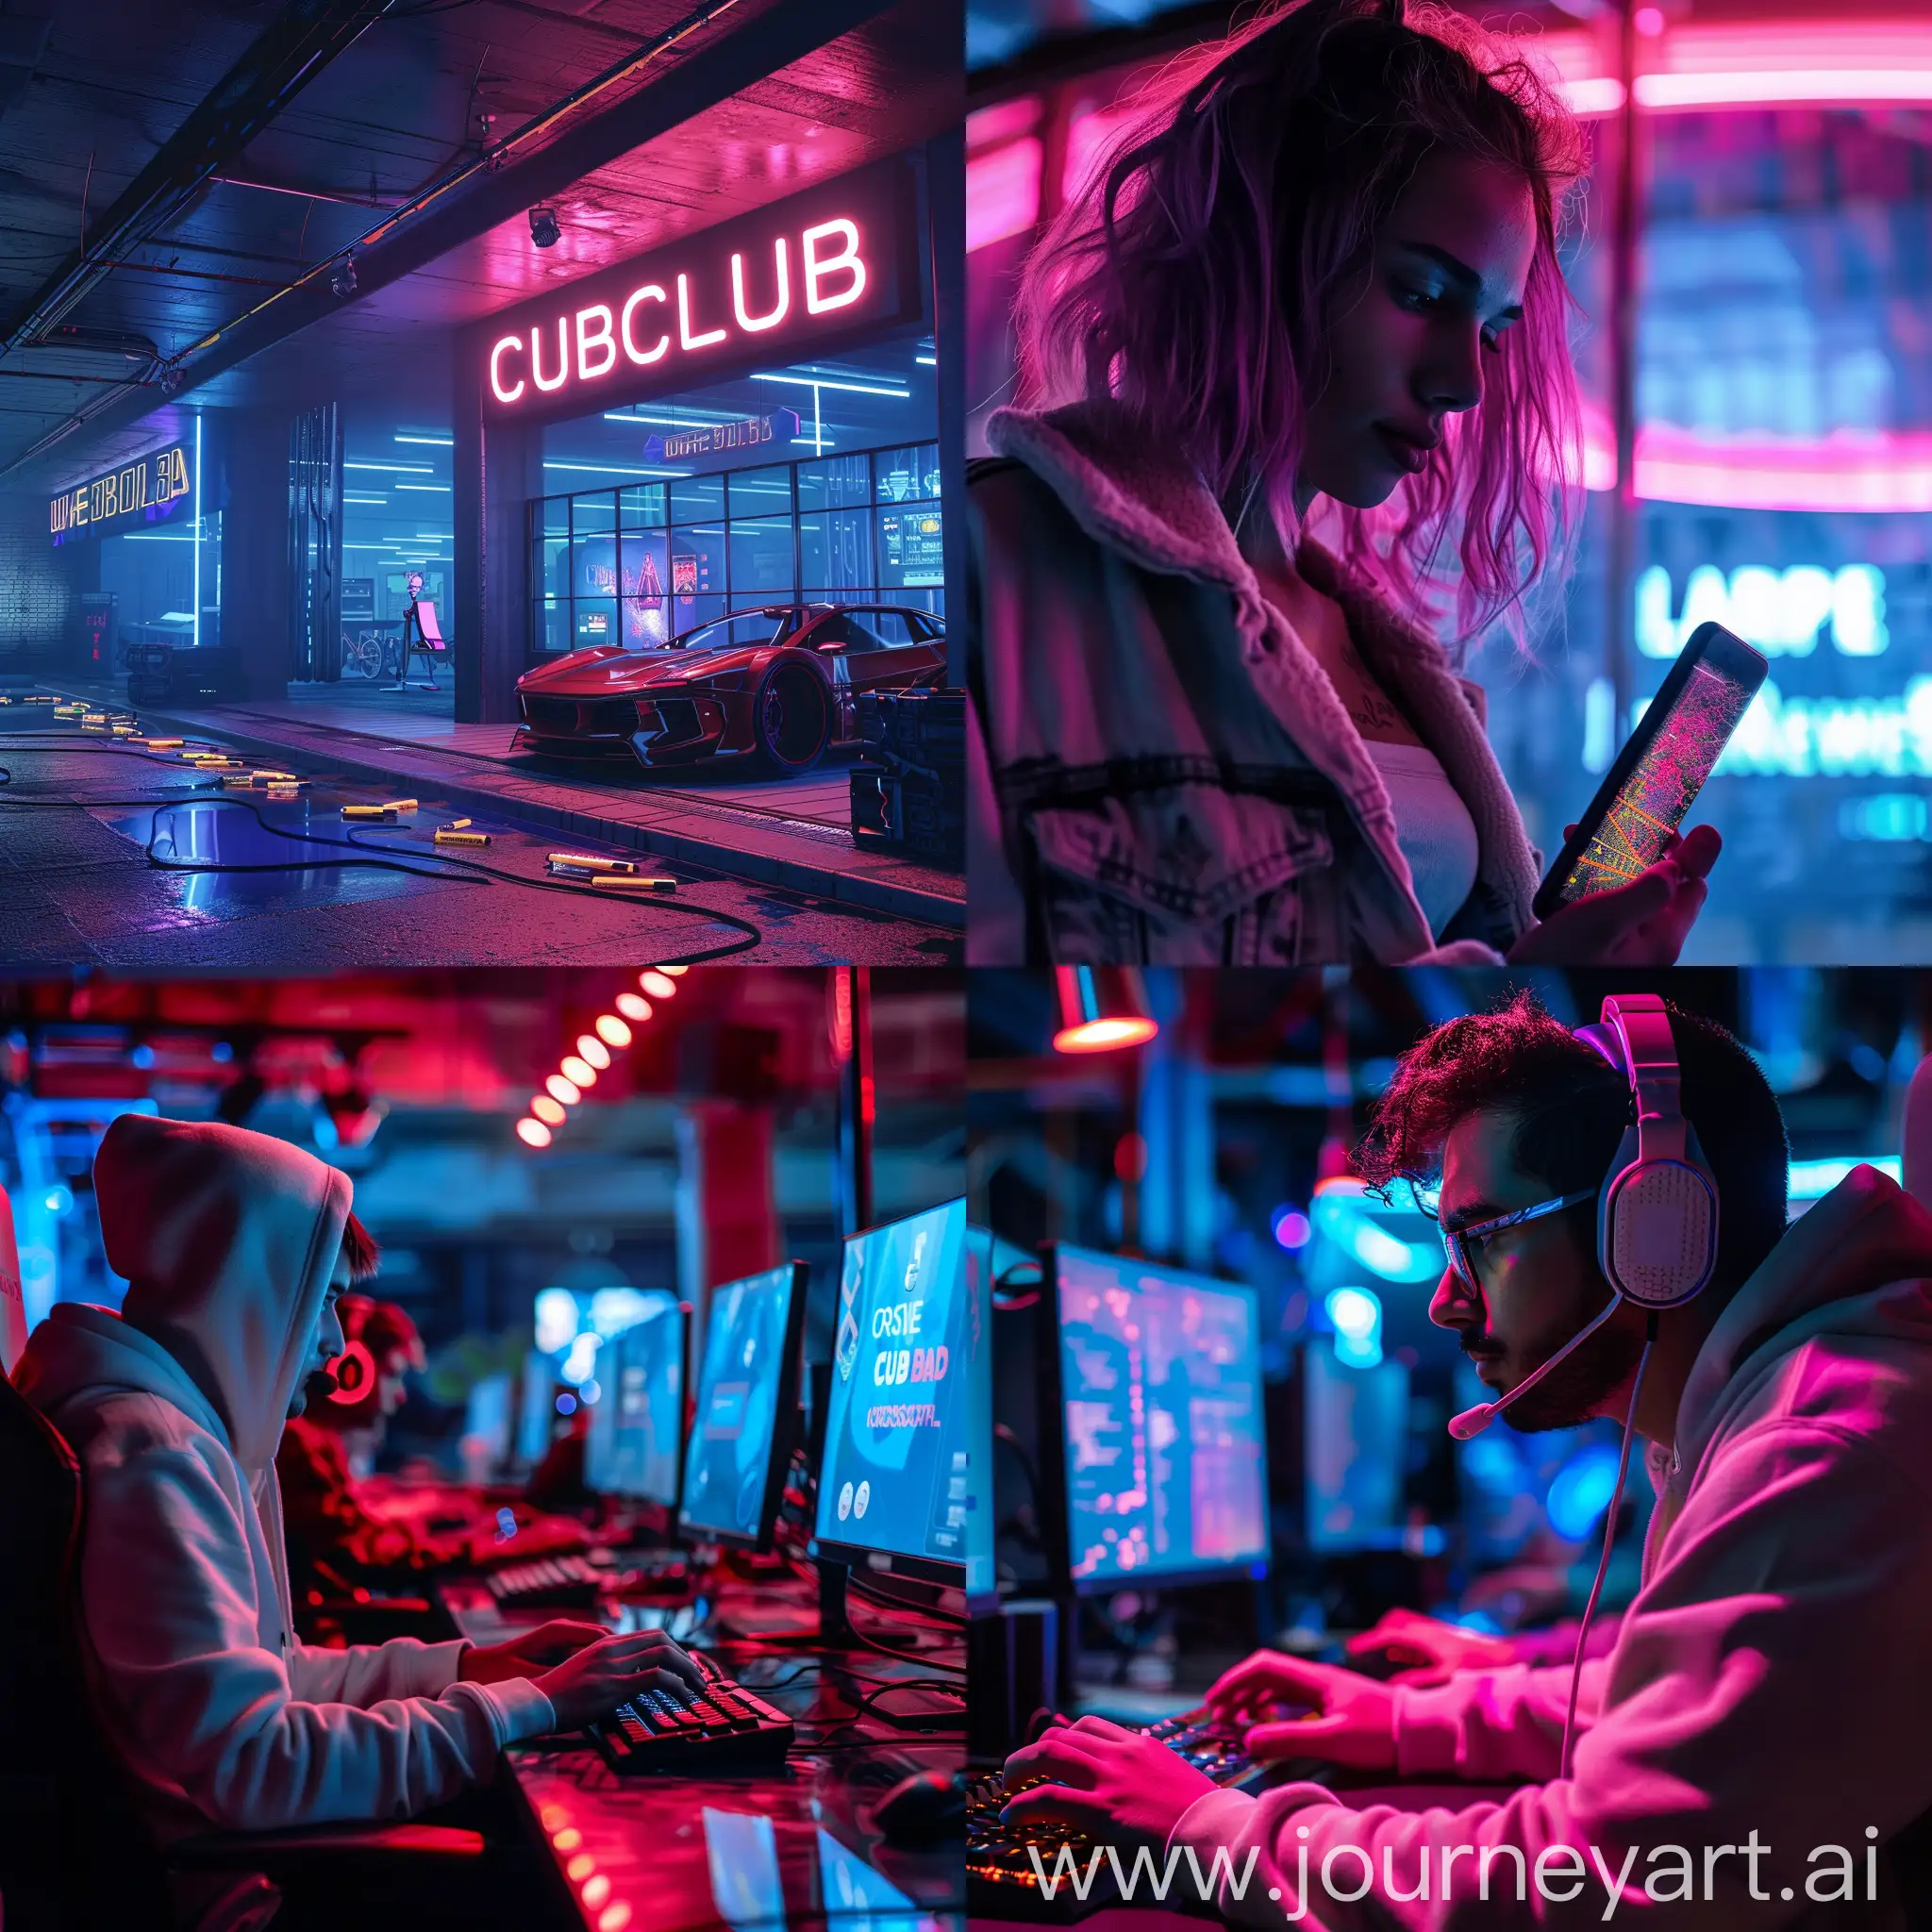 Futuristic-Cyber-Club-Scene-with-Neon-Lights-and-Techno-Vibes